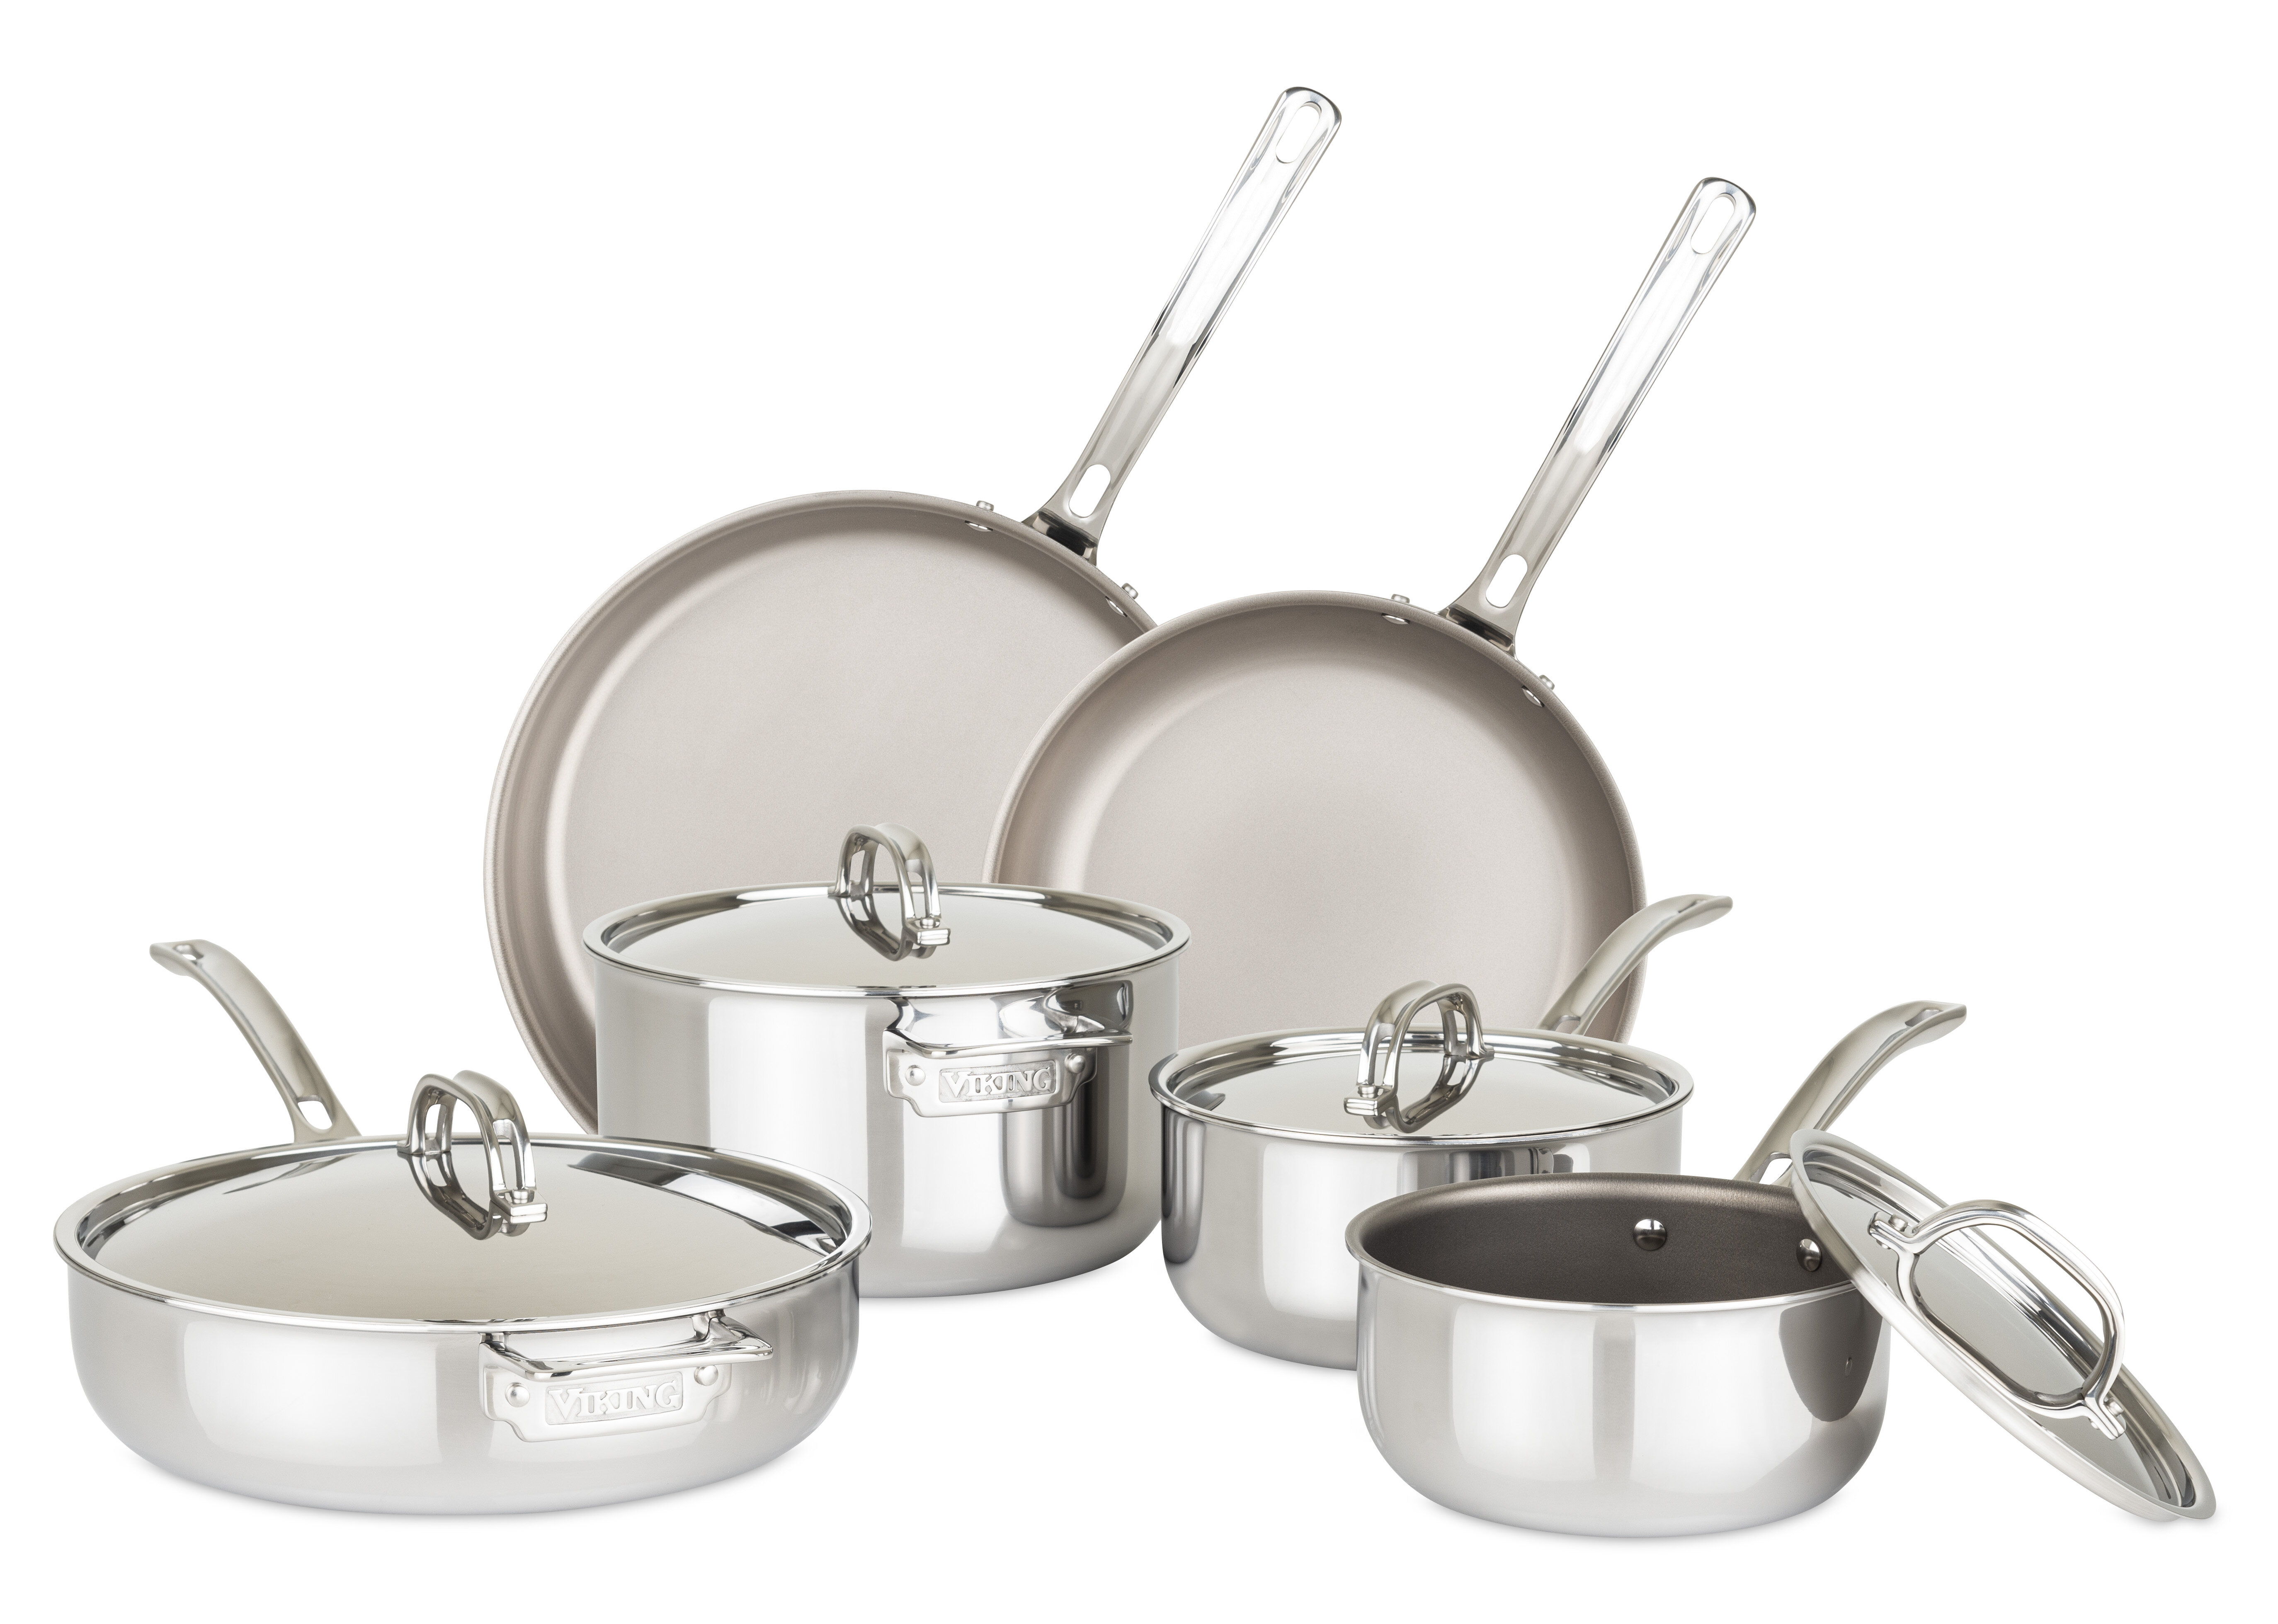 SilverAnt | 2-Piece Camping Cookware Set with Hanger | Large | Titanium